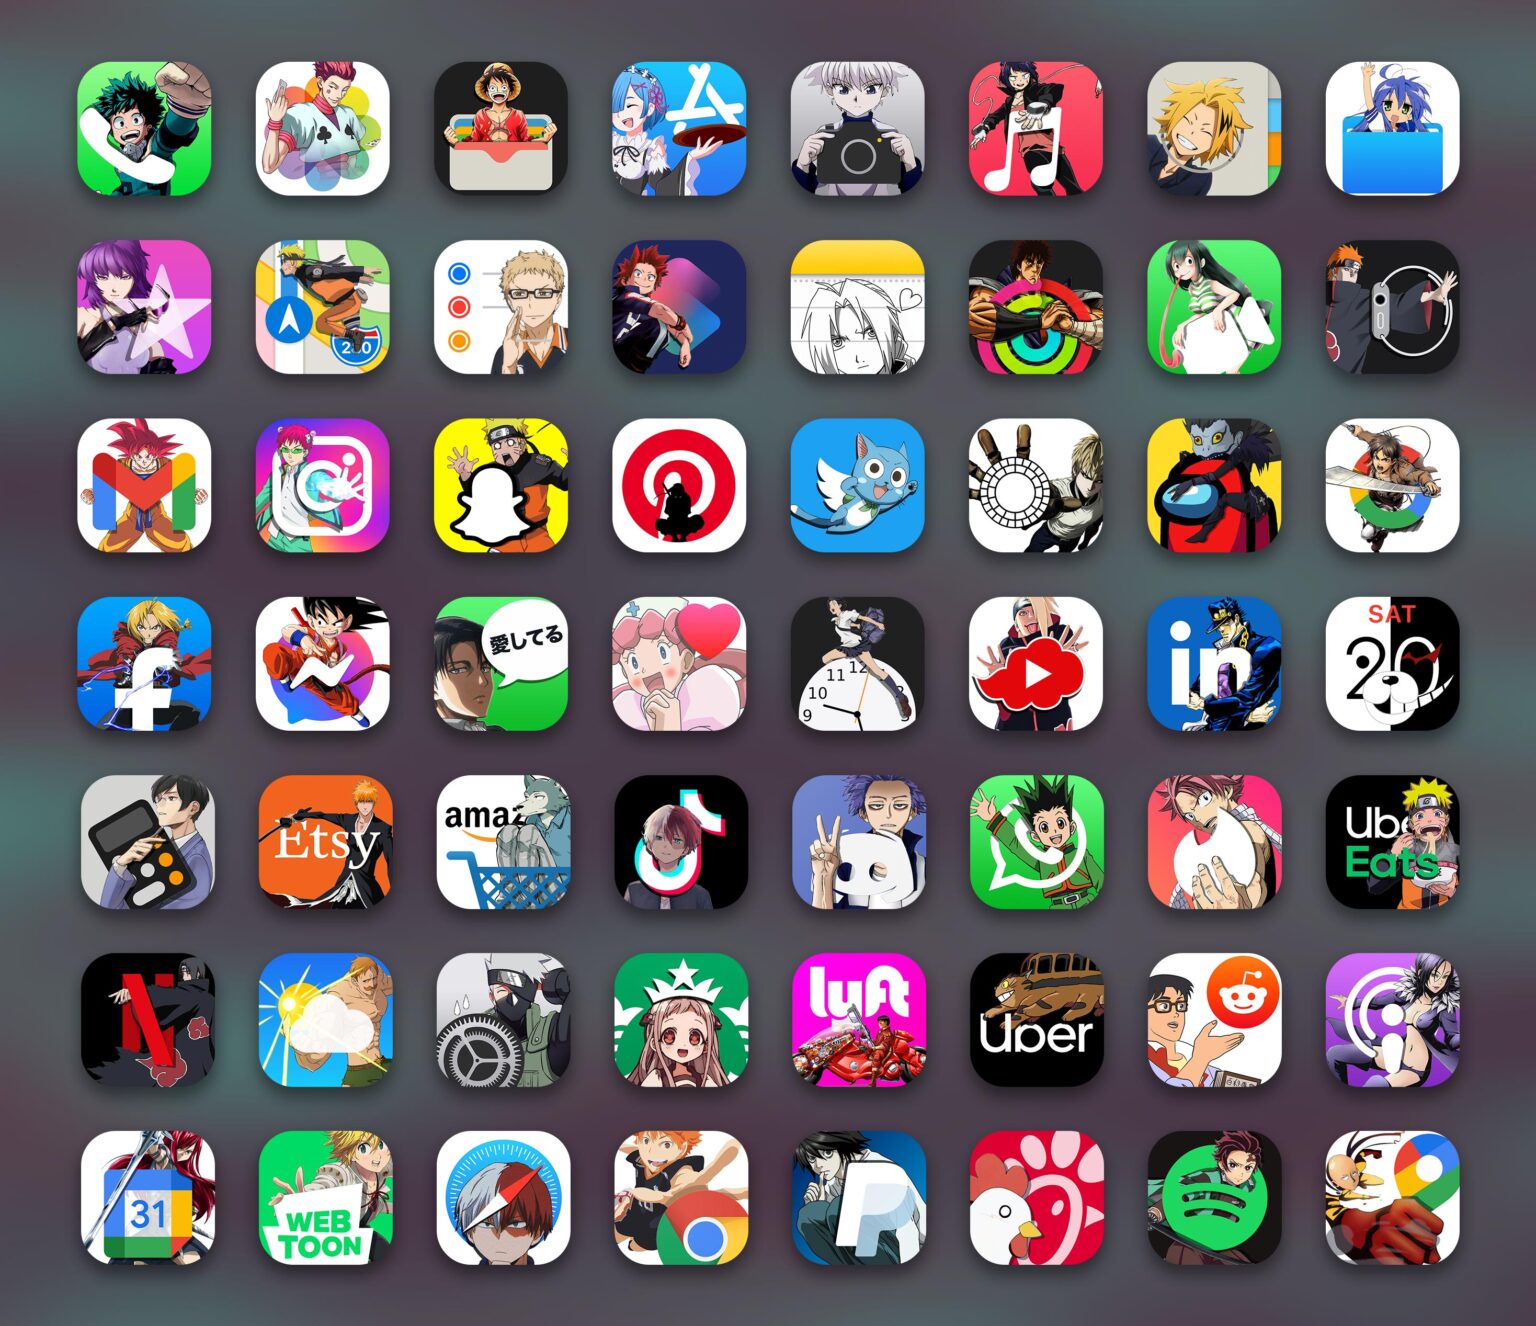 Anime app icons iphone - gaygaret